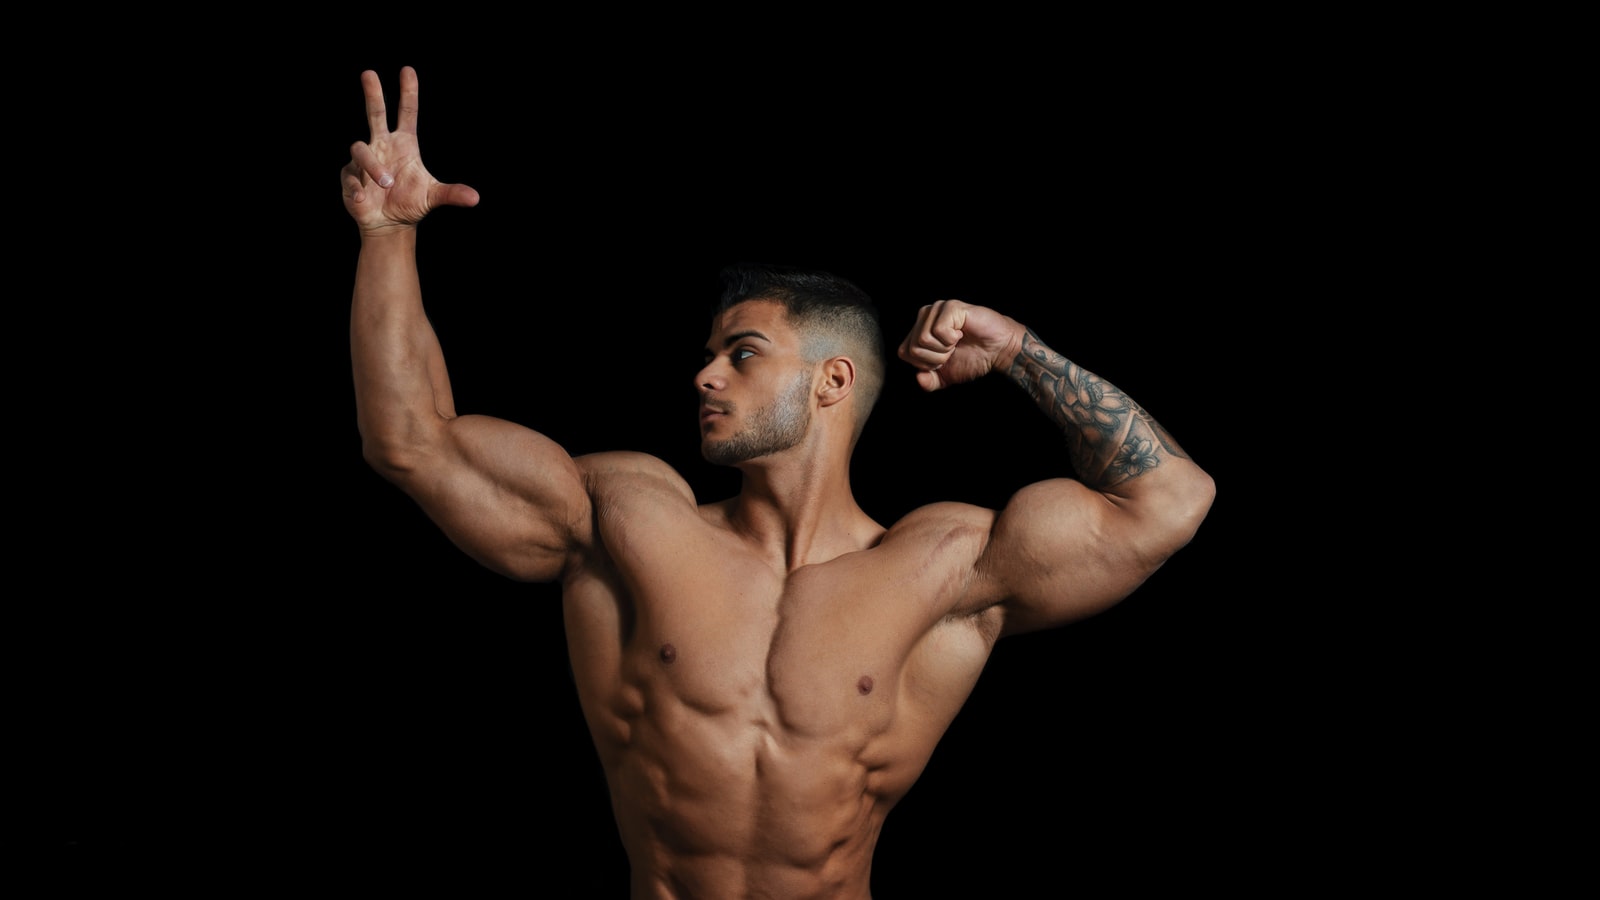 Shredded topless man with hands up